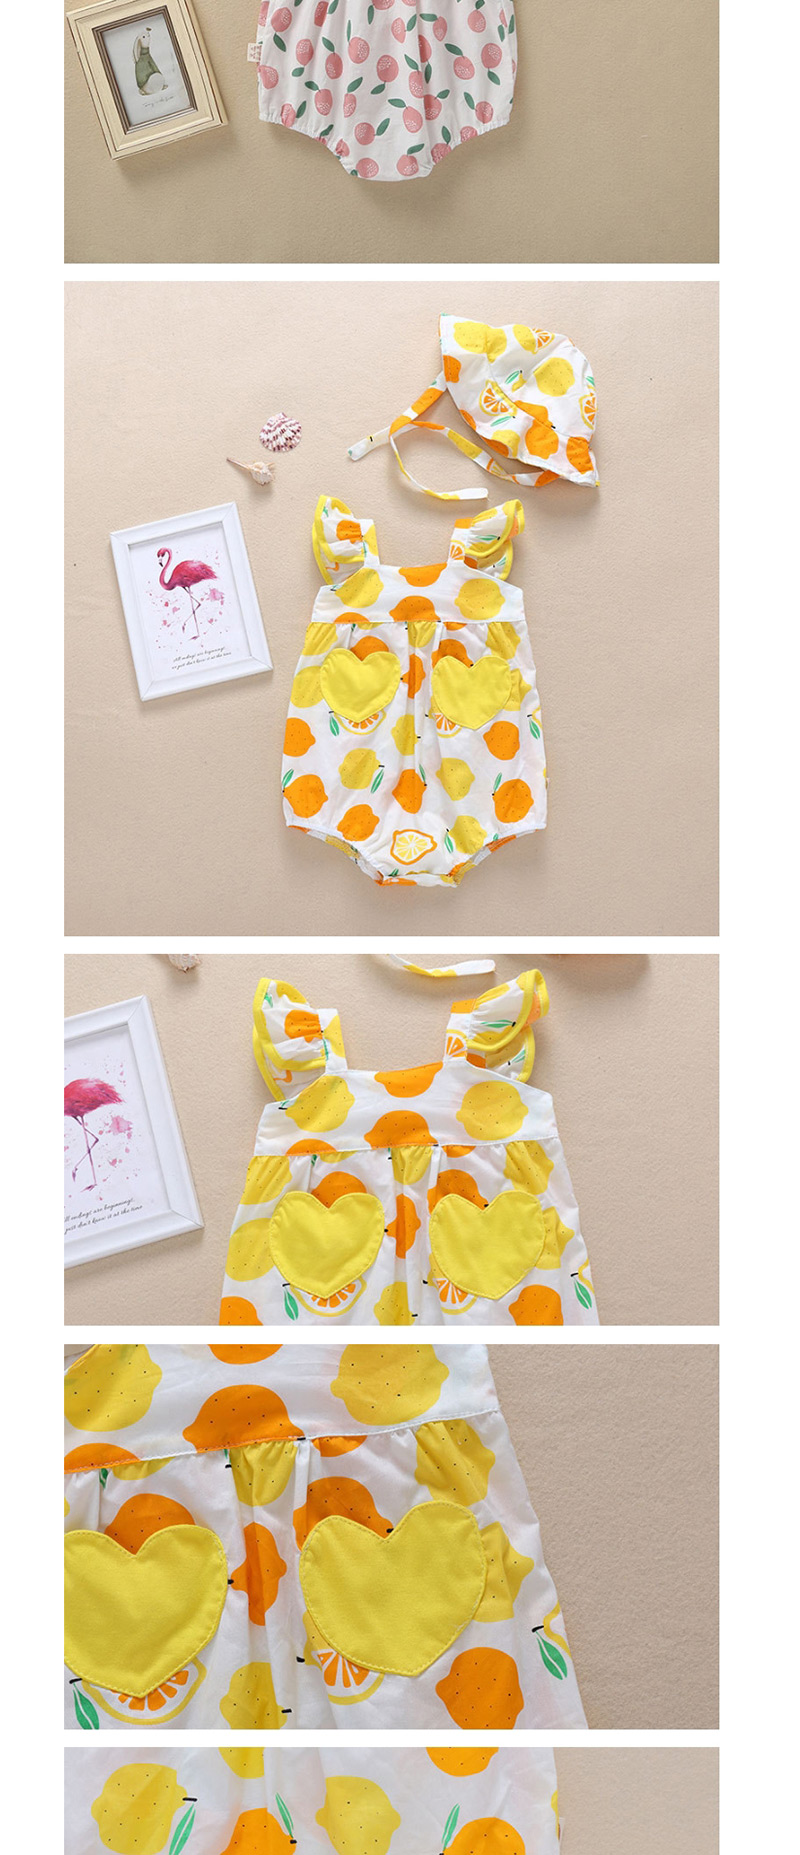 Fashion Yellow Apple Fruit Print Love Patch Pocket Baby Triangle Lace,Kids Clothing